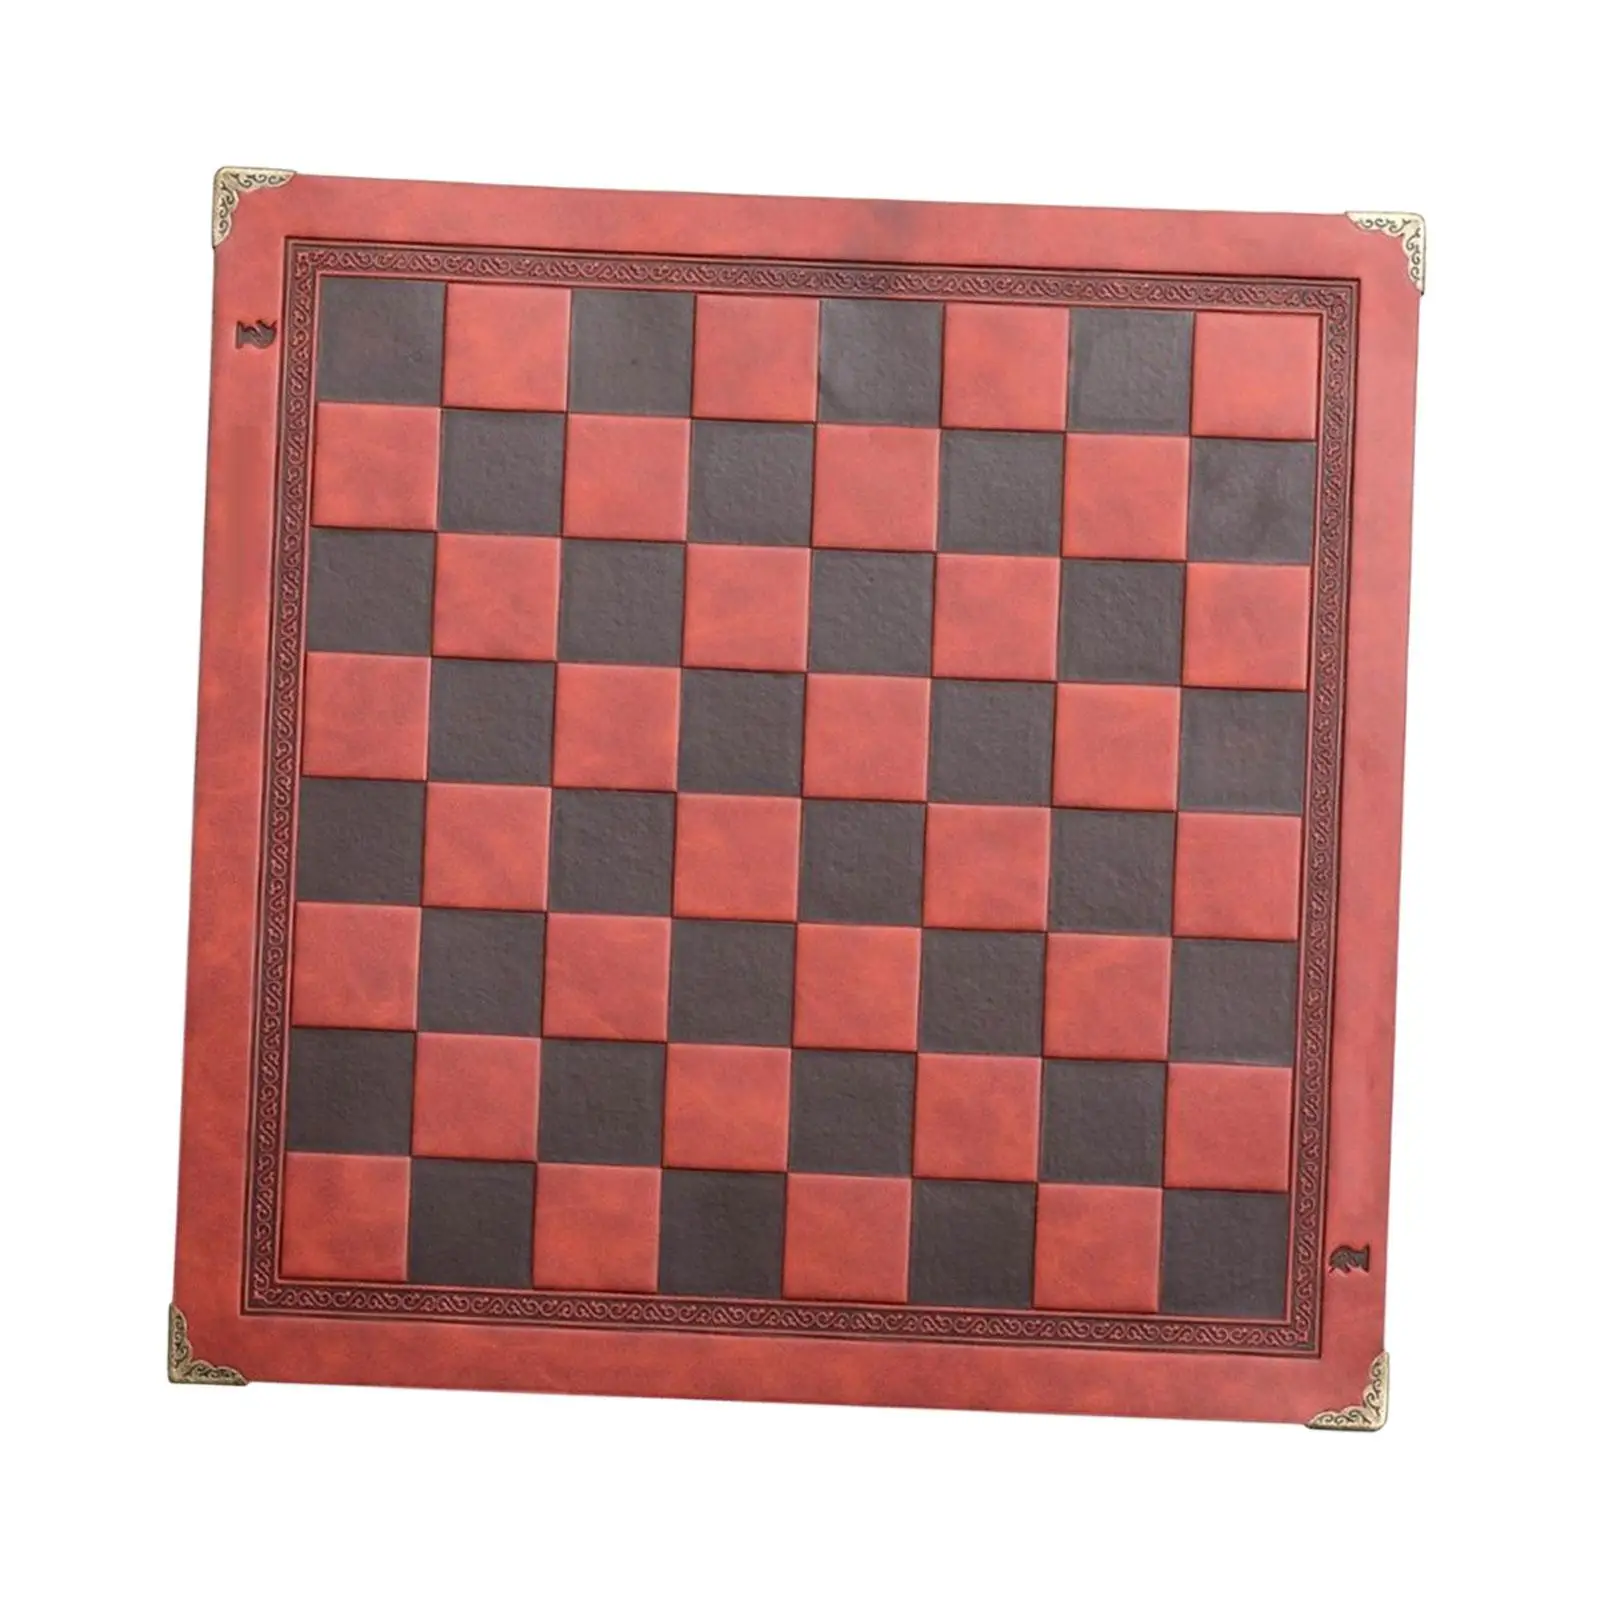 Chessboard Mat Heat Resistant Wipeable Antiskid PU Leather Portable Chess Pad Mat for Home chess park Game Counter Top